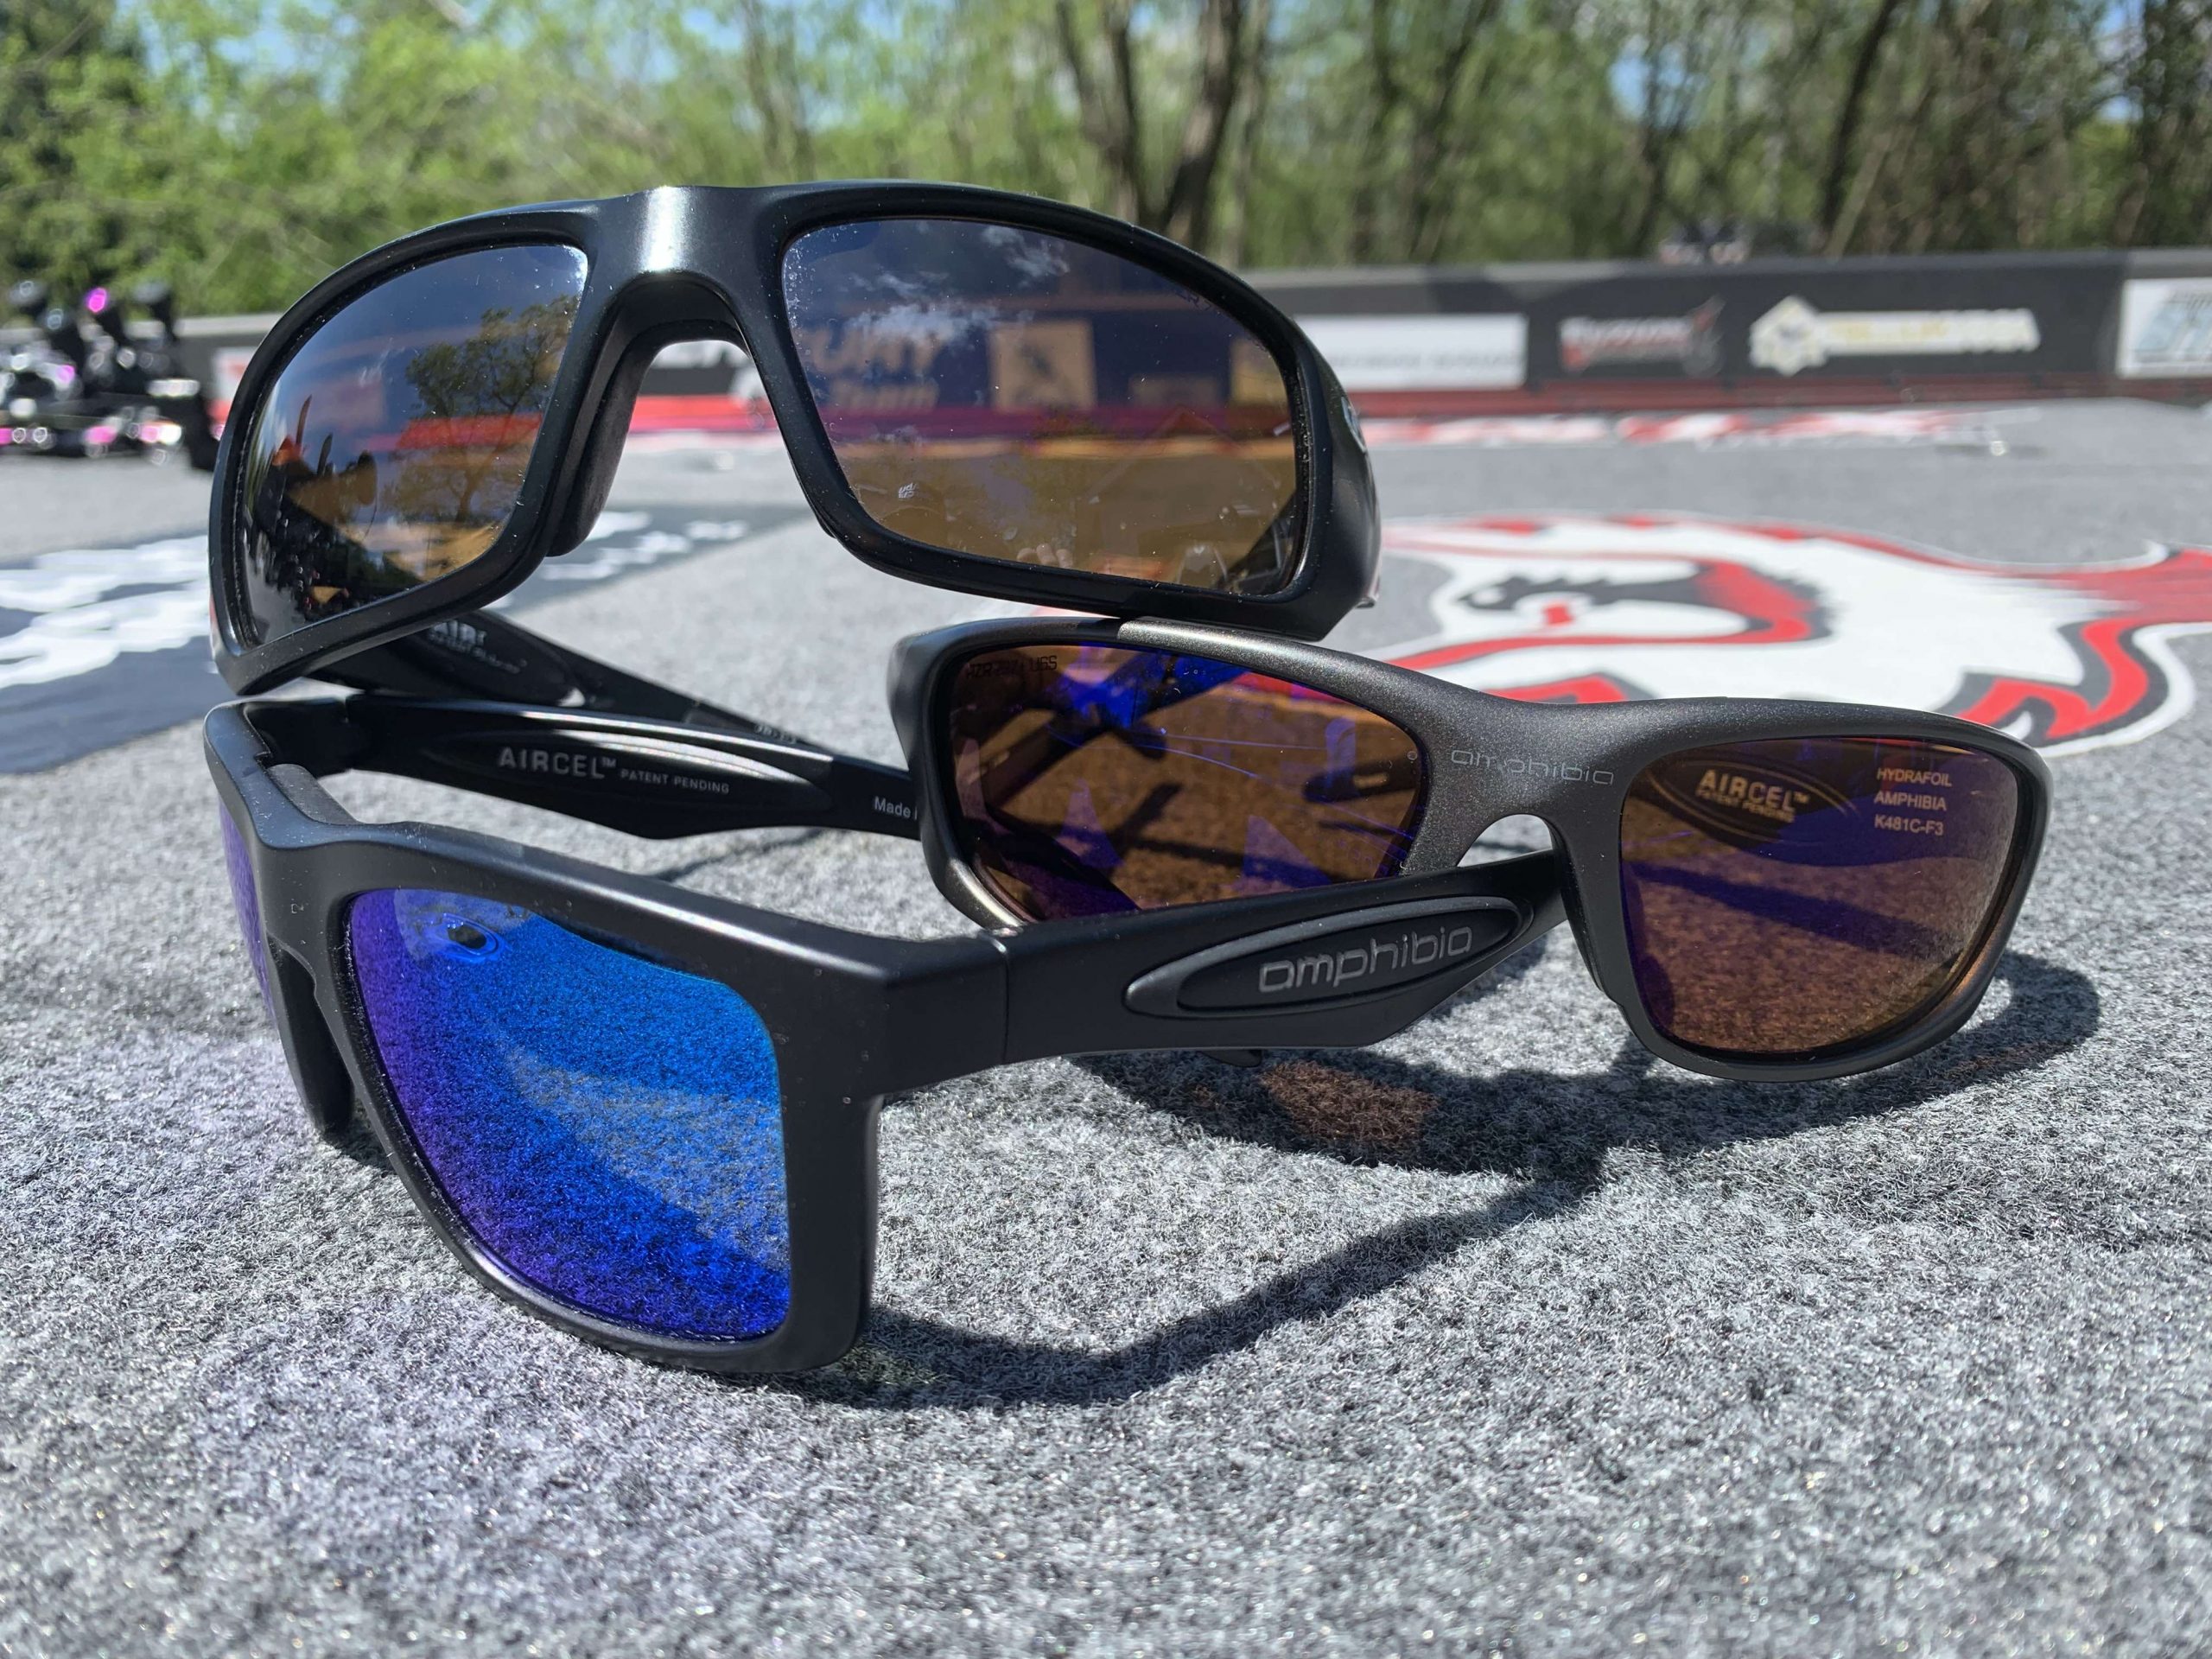 Take it up a notch by wearing lenses that cut glare and optimize underwater vision to up the odds of seeing the fish. Groh wears lenses for sunny and cloudy days. Amphibia frames also float and have the highly desired ANSI Z87.1 safety rating.
